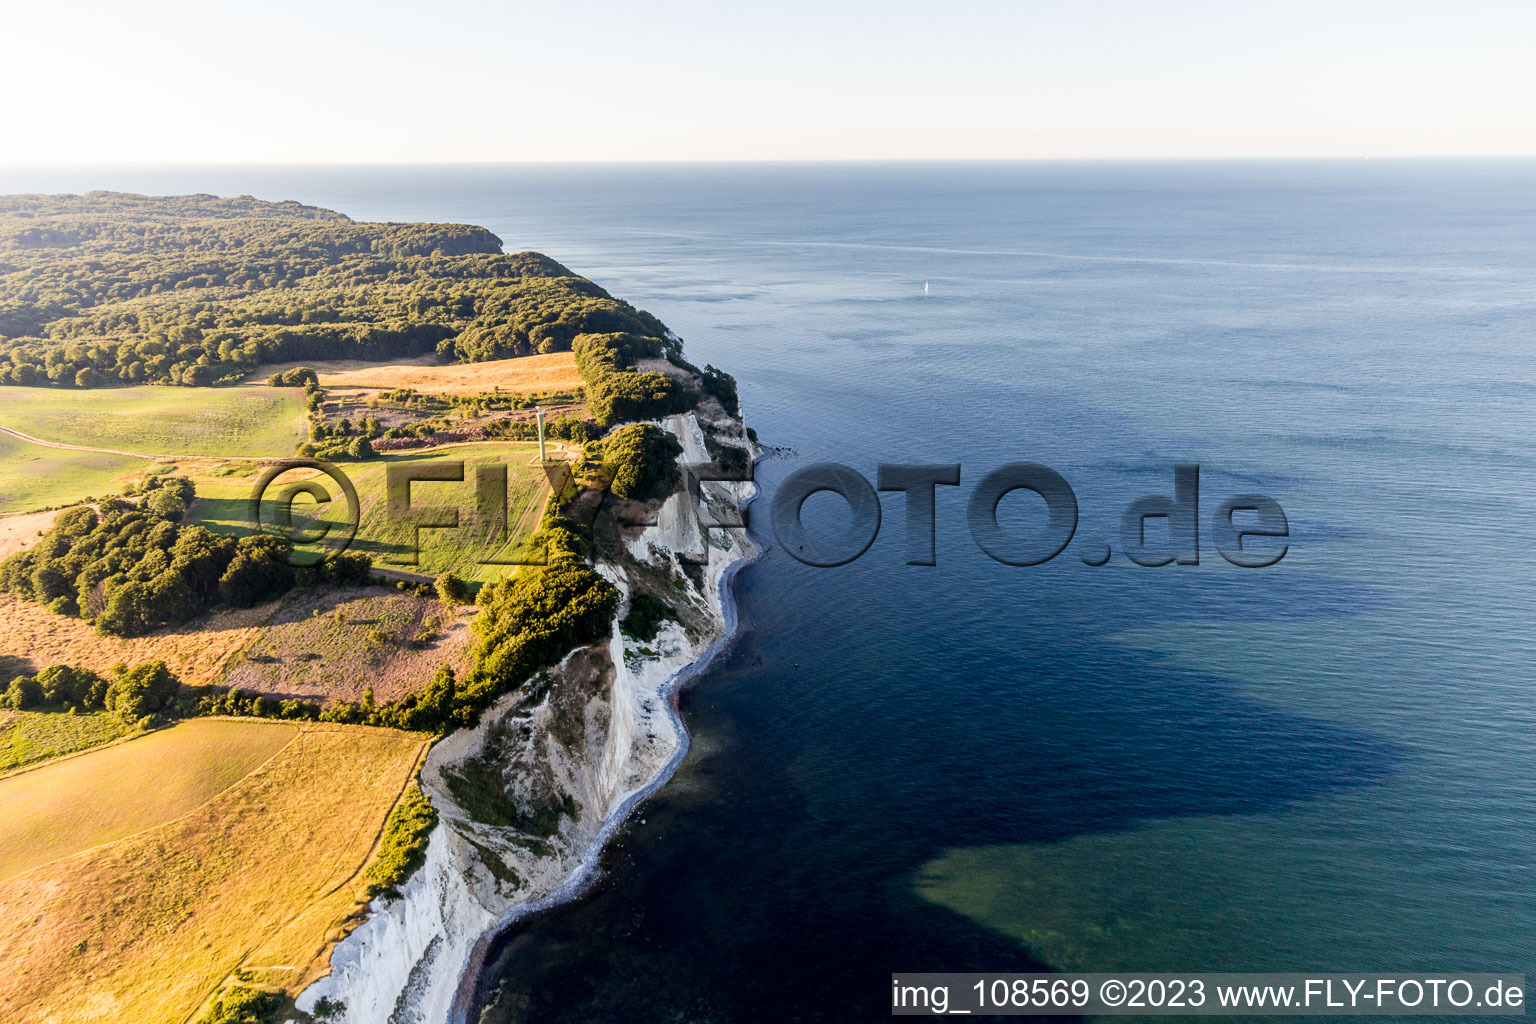 Borre in the state Zealand, Denmark from a drone